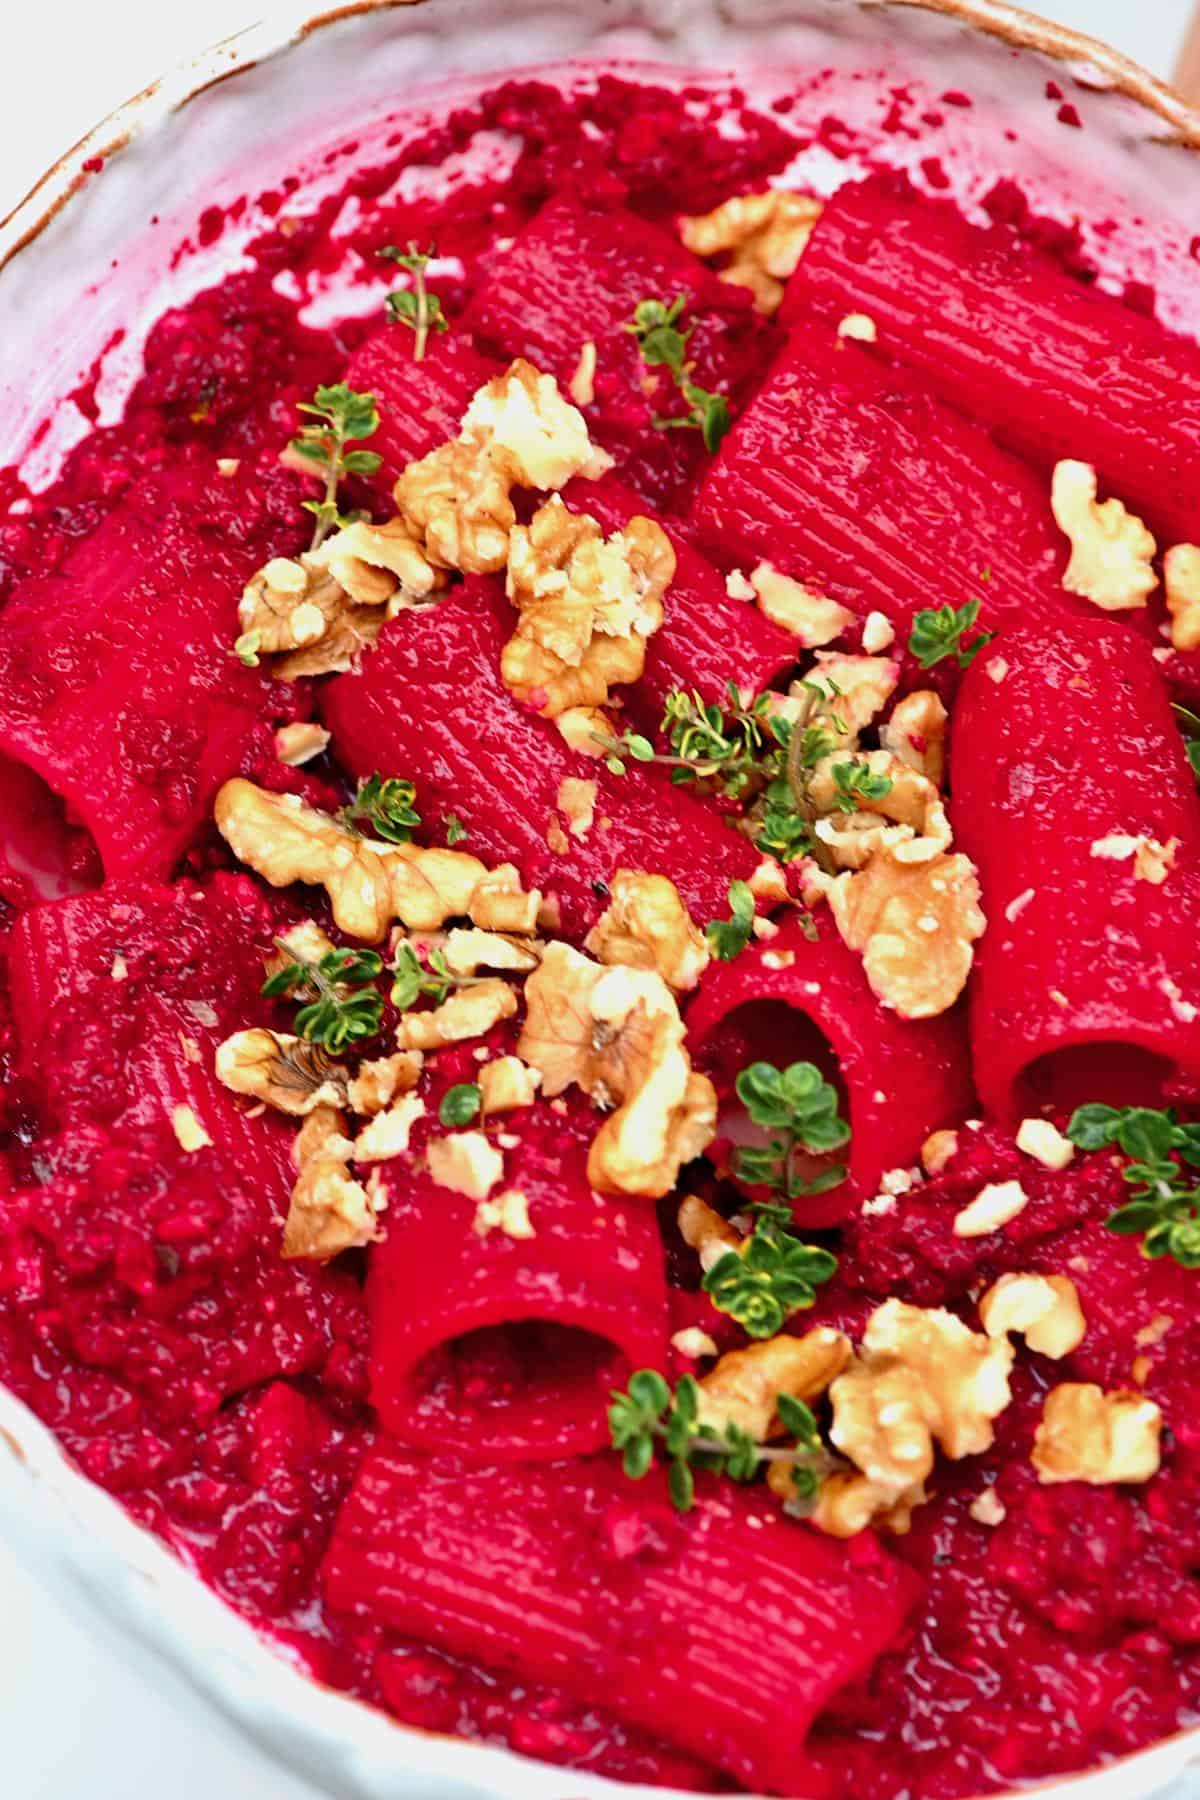 Beetroot pasta topped with walnuts